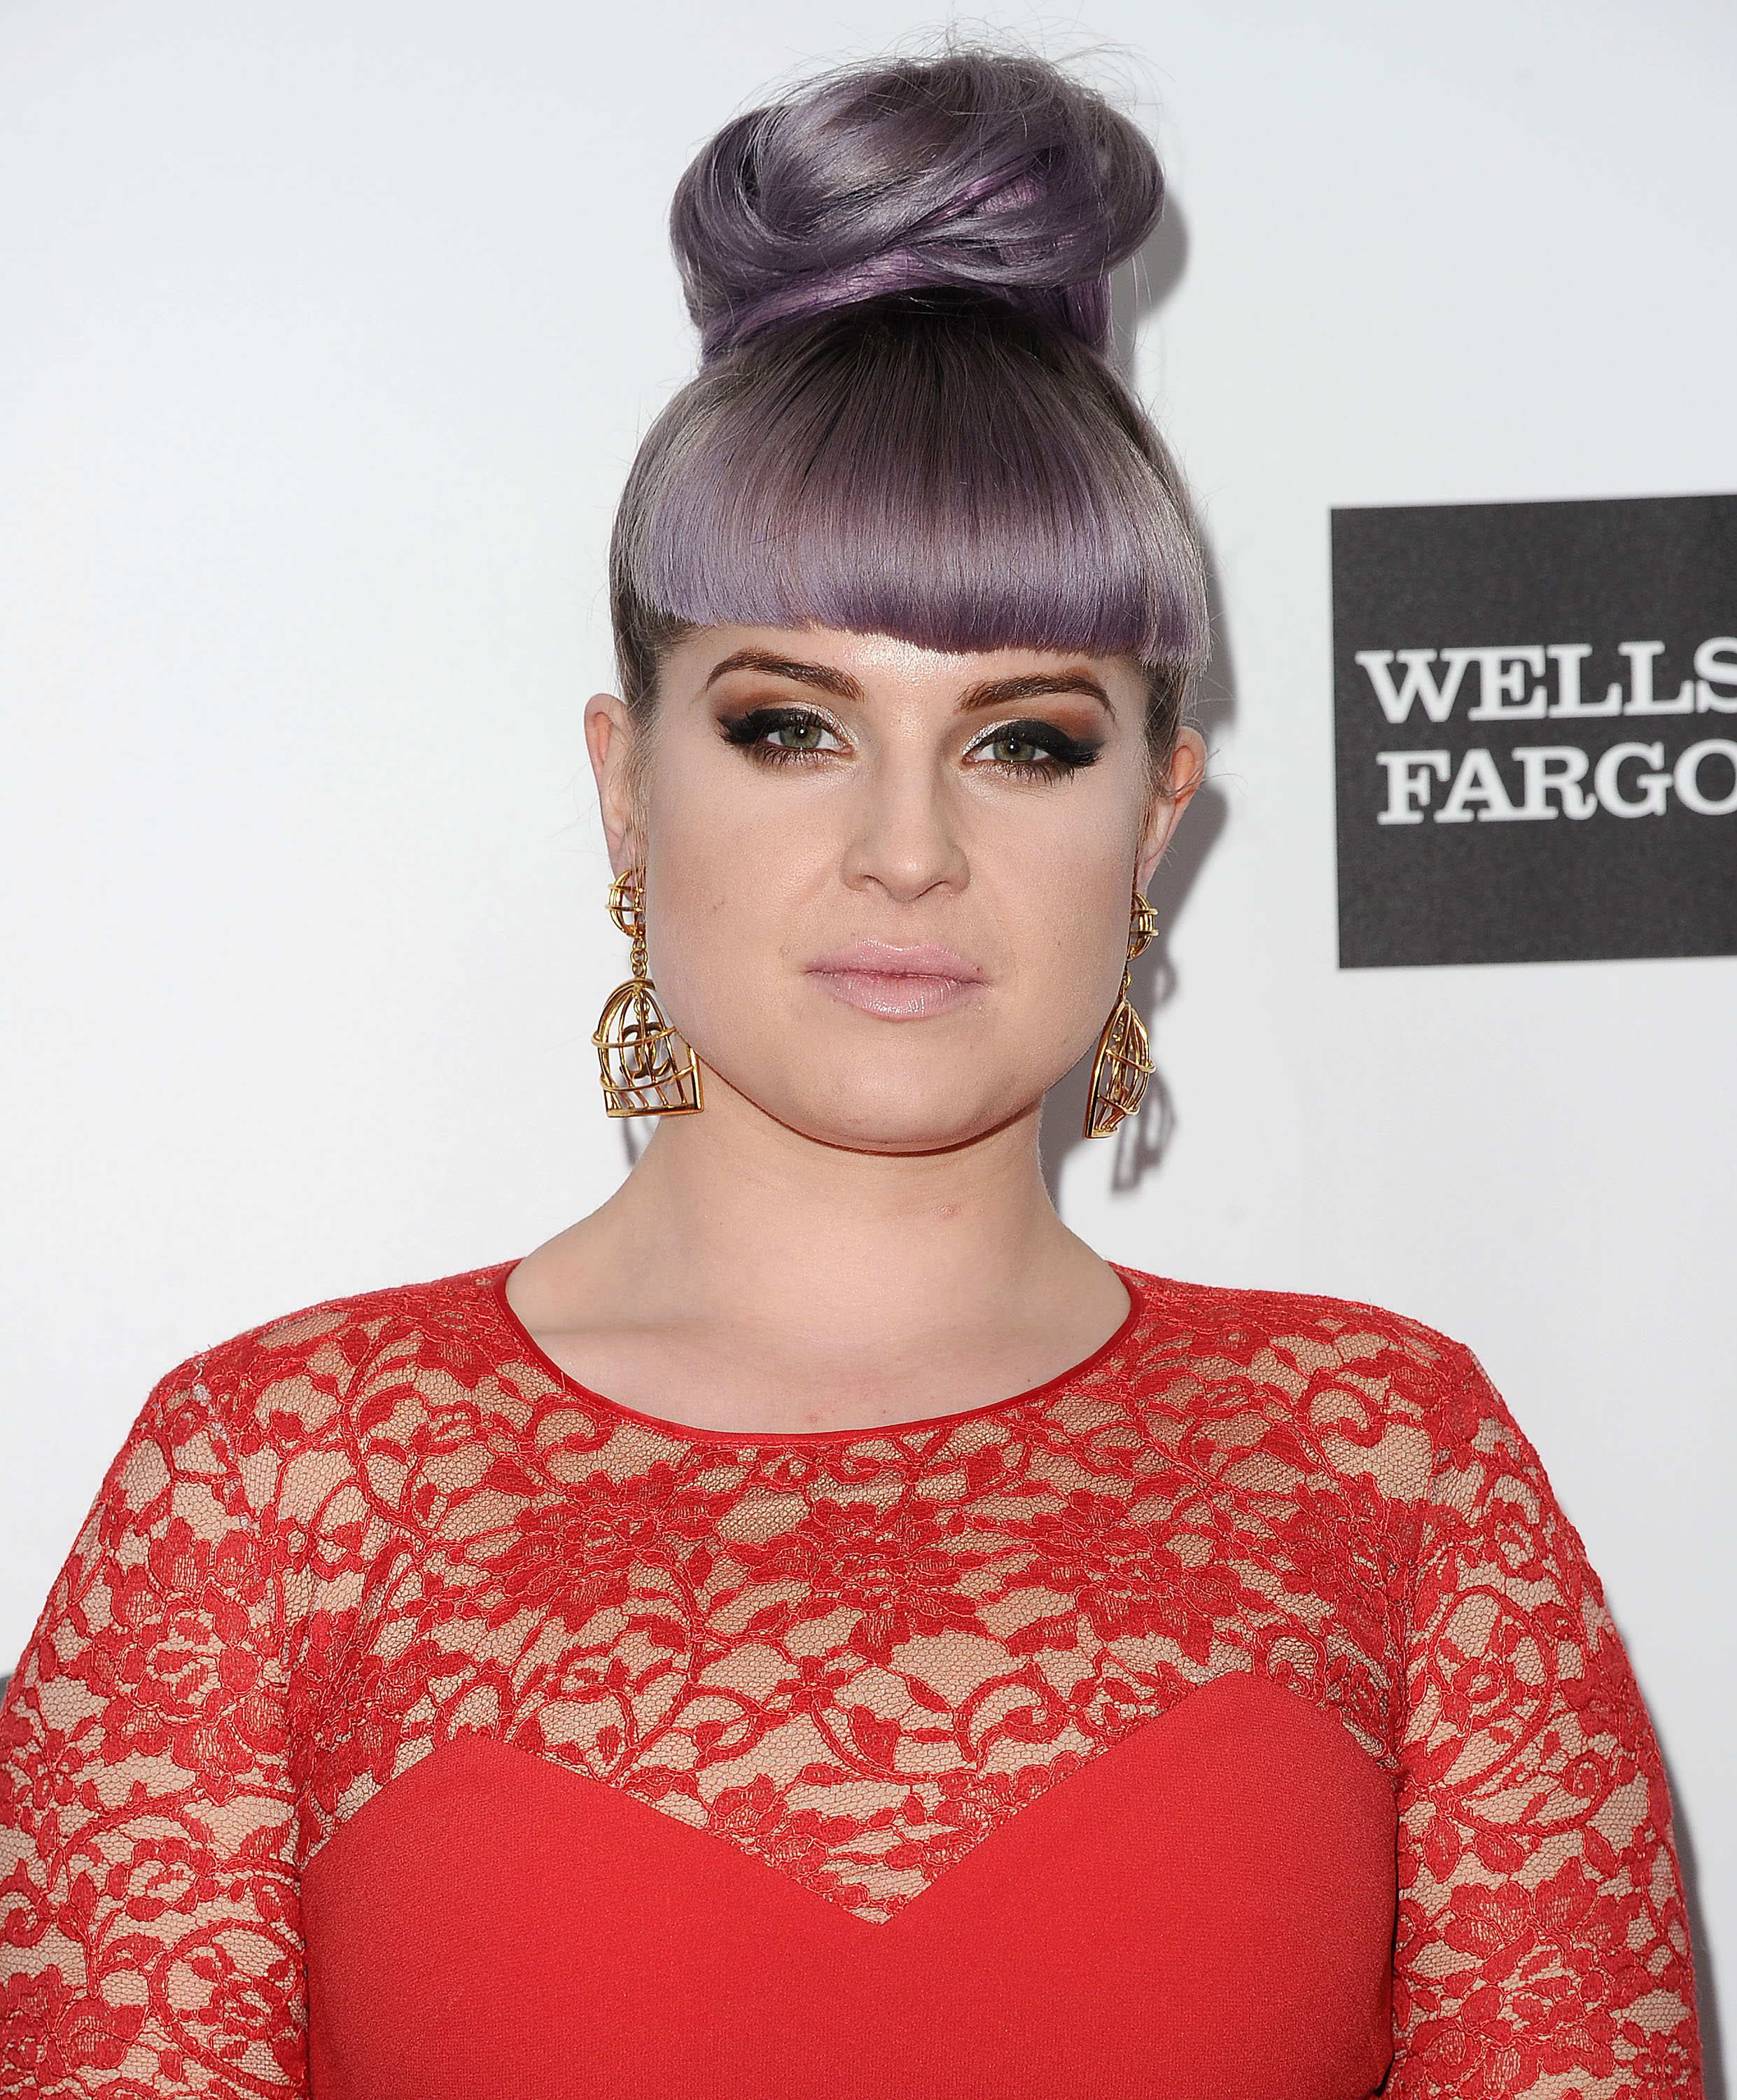 Kelly Osbourne at the amfAR Inspiration Gala on December 12, 2013, in Hollywood, California | Source: Getty Images